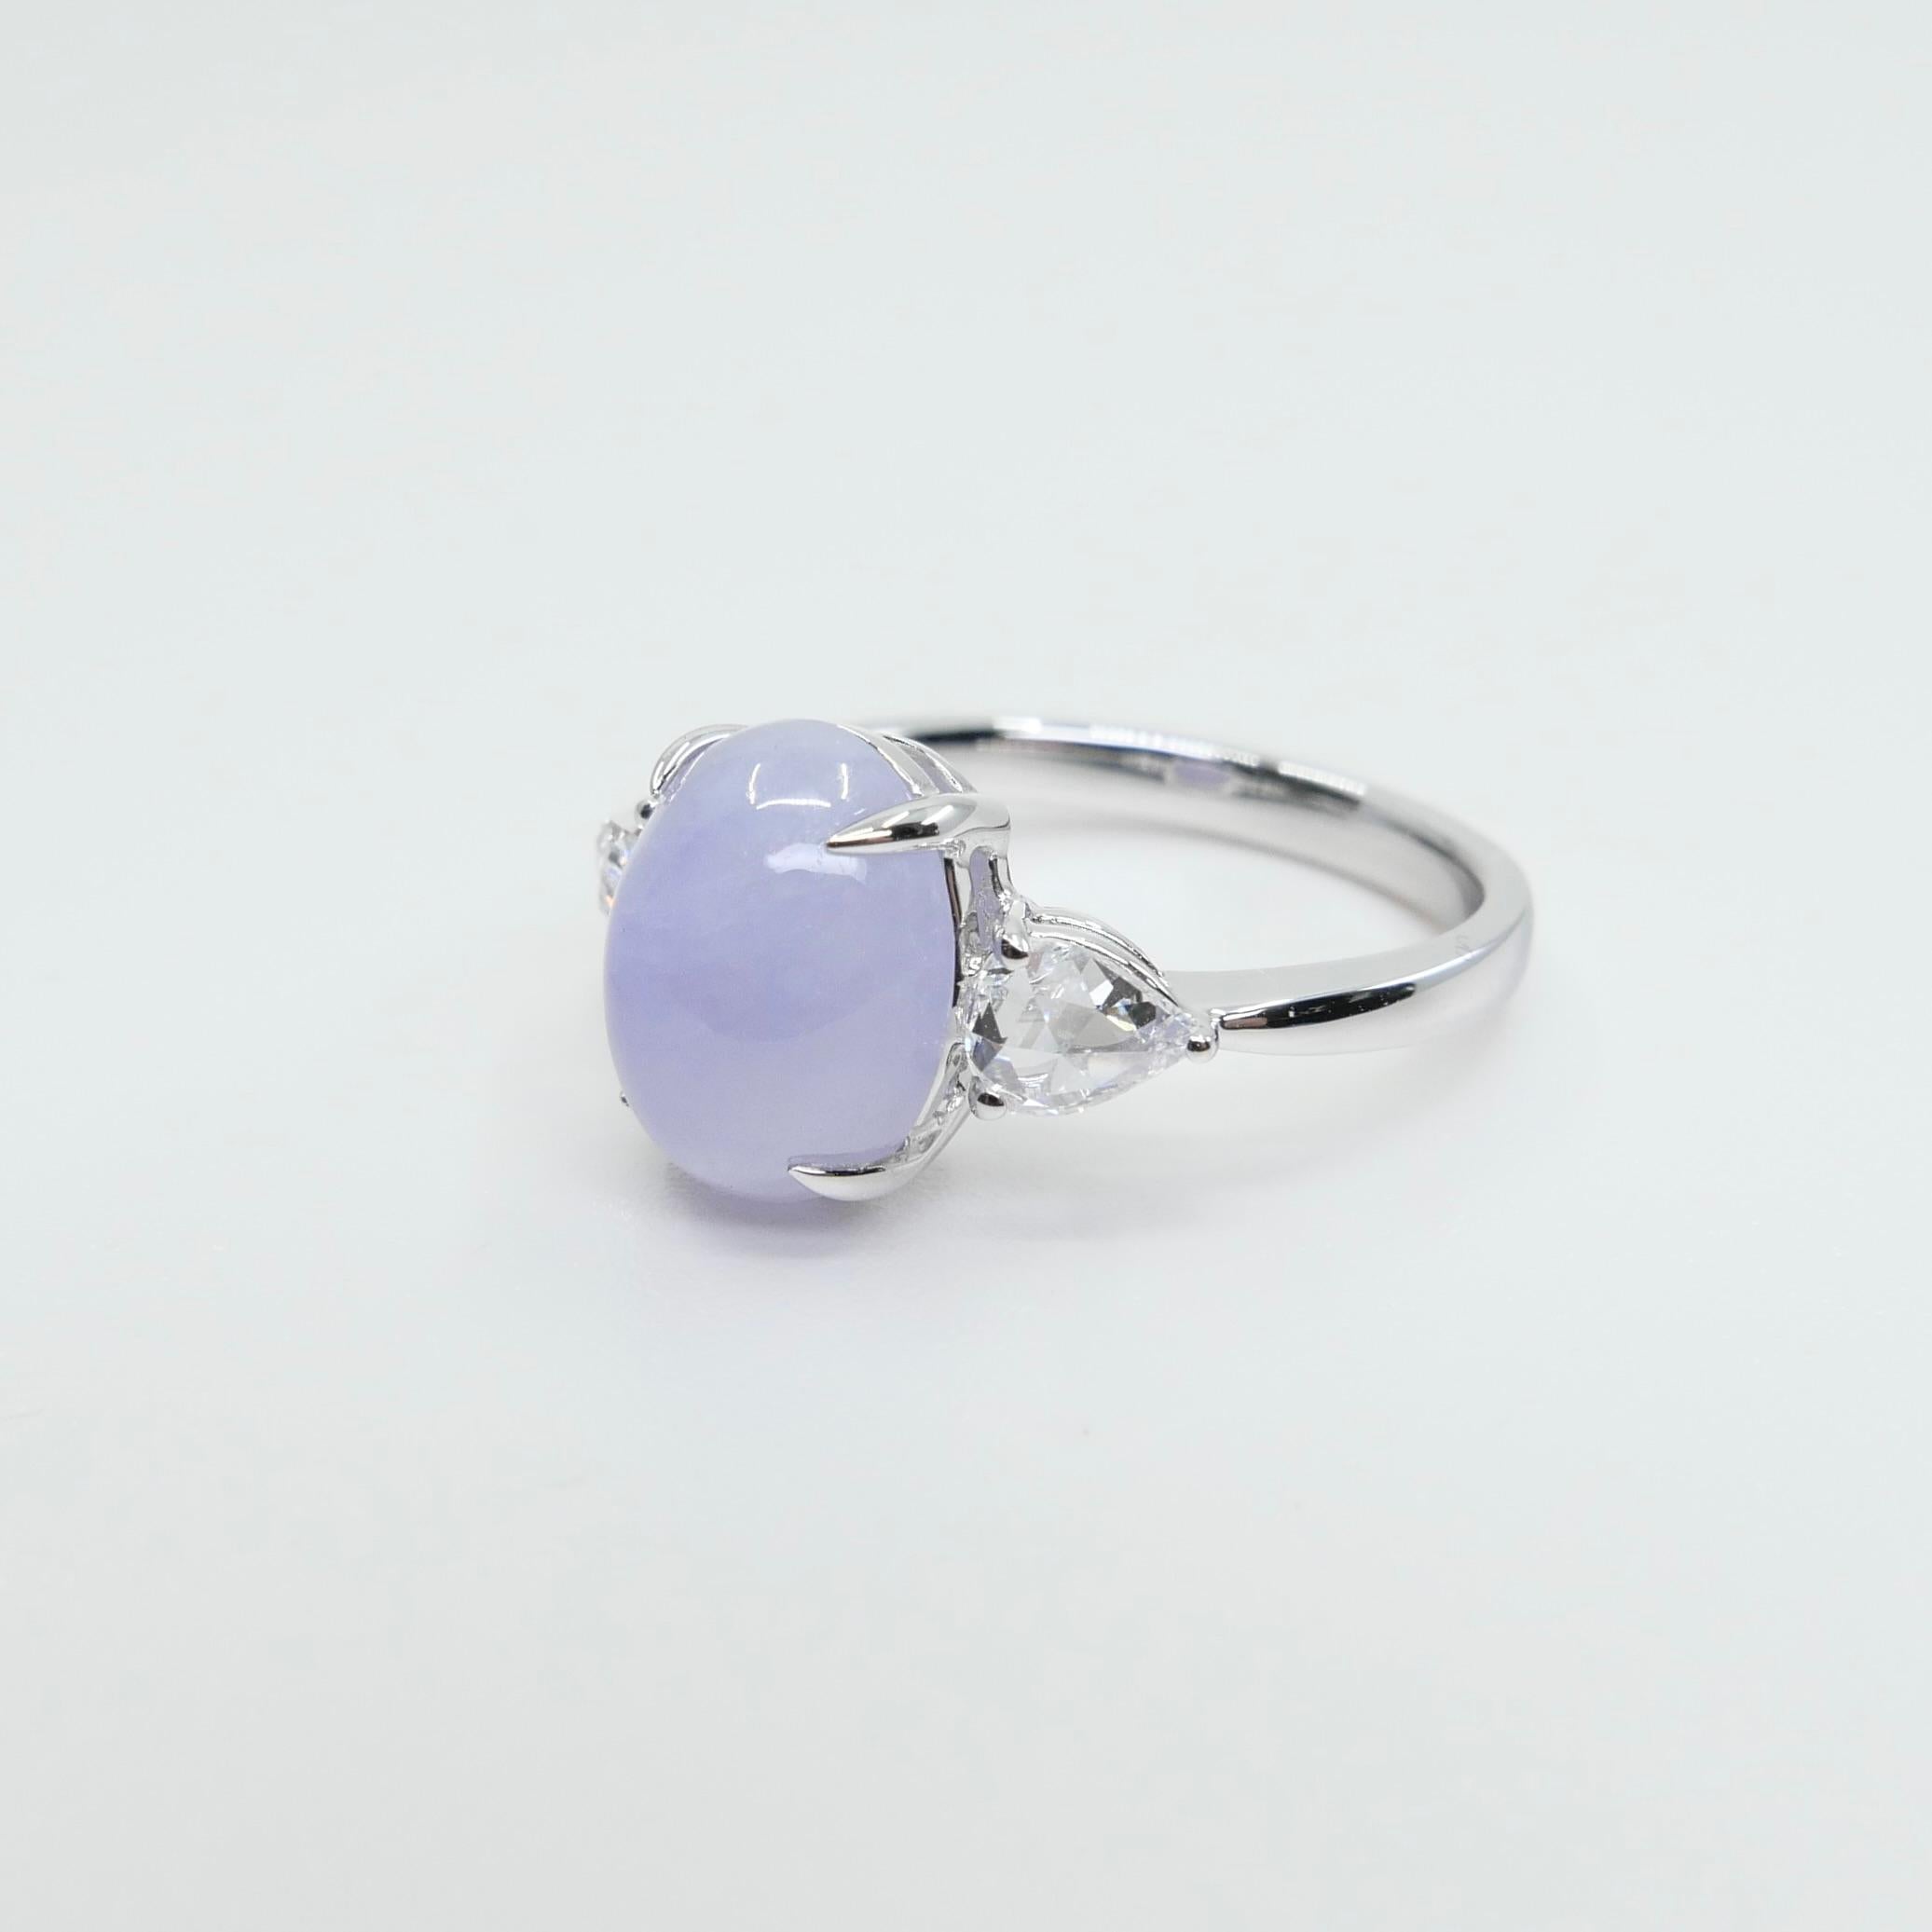 Certified 4.01 Carats Lavender Jade & Rose Cut Pear Shaped Diamond 3 Stone Ring For Sale 4